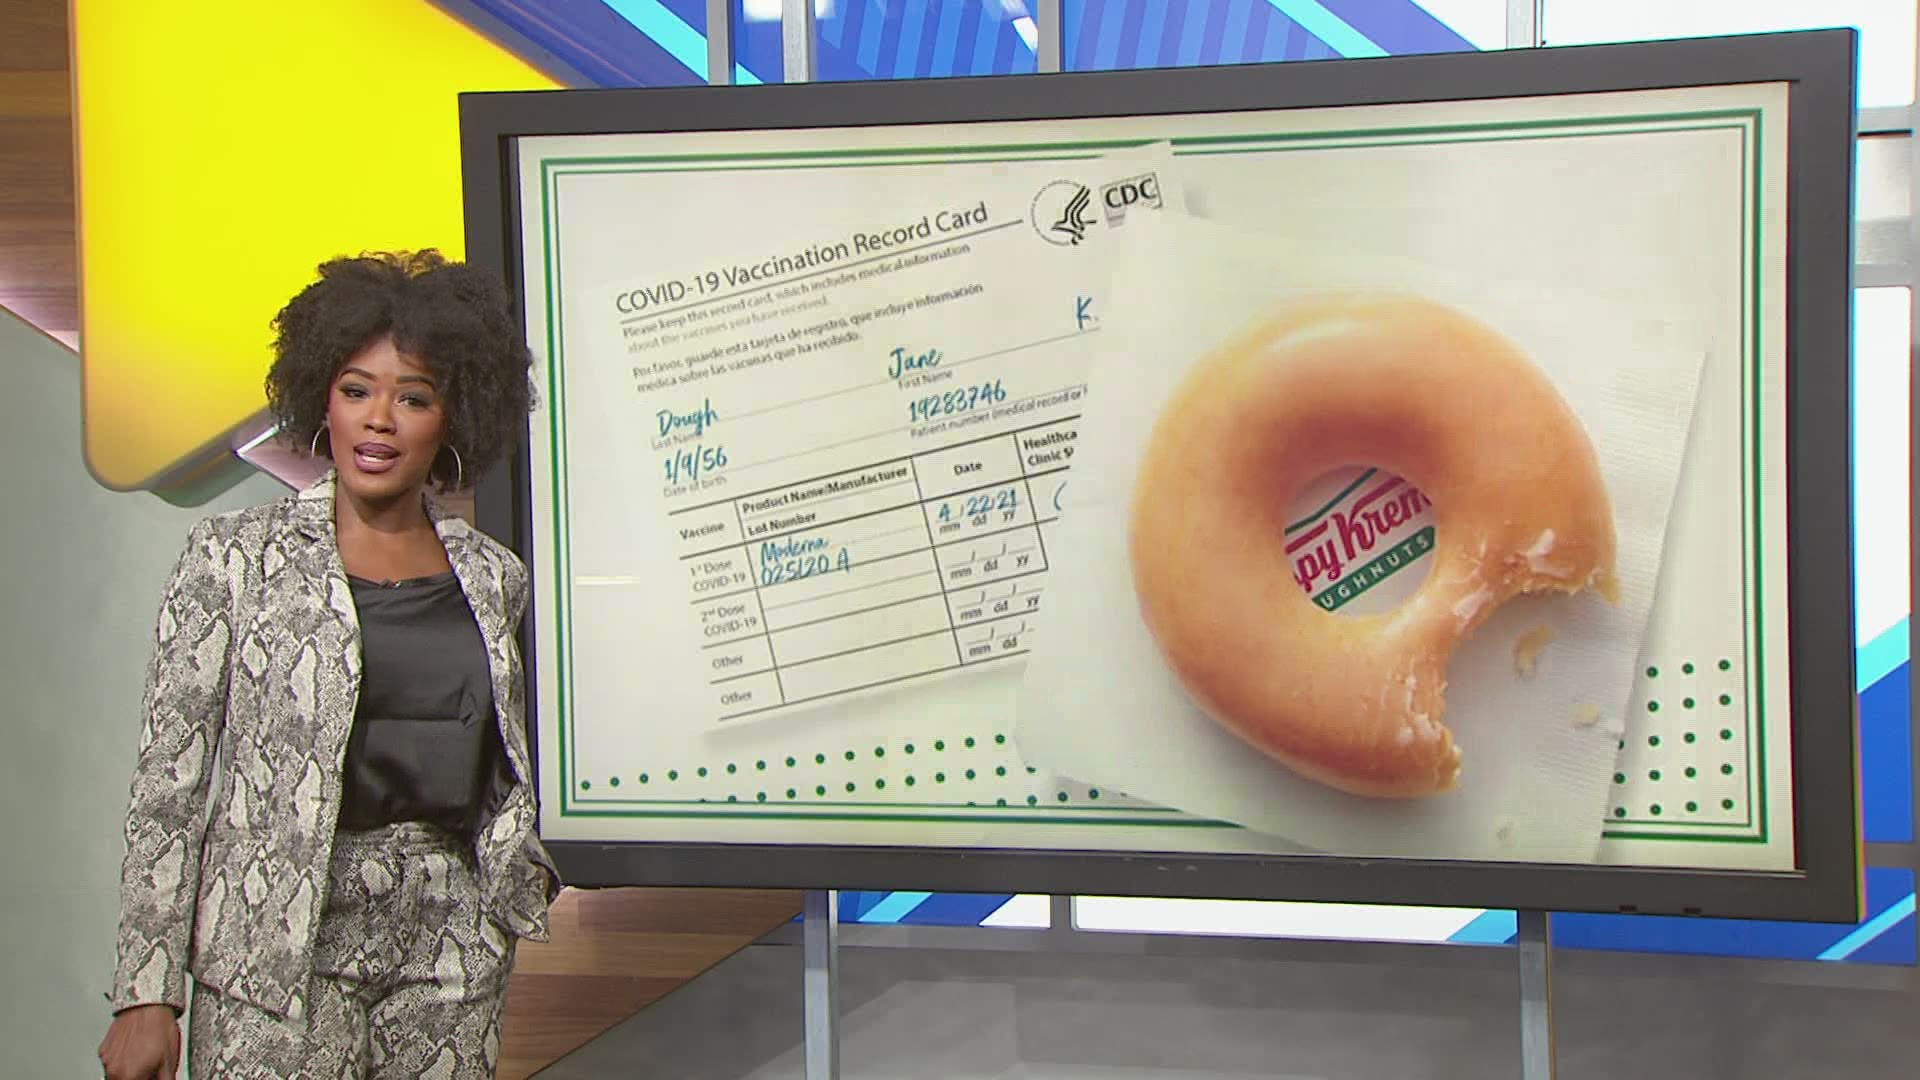 Anyone who shows their COVID-19 Vaccination Record Card will receive a free Original Glazed doughnut.